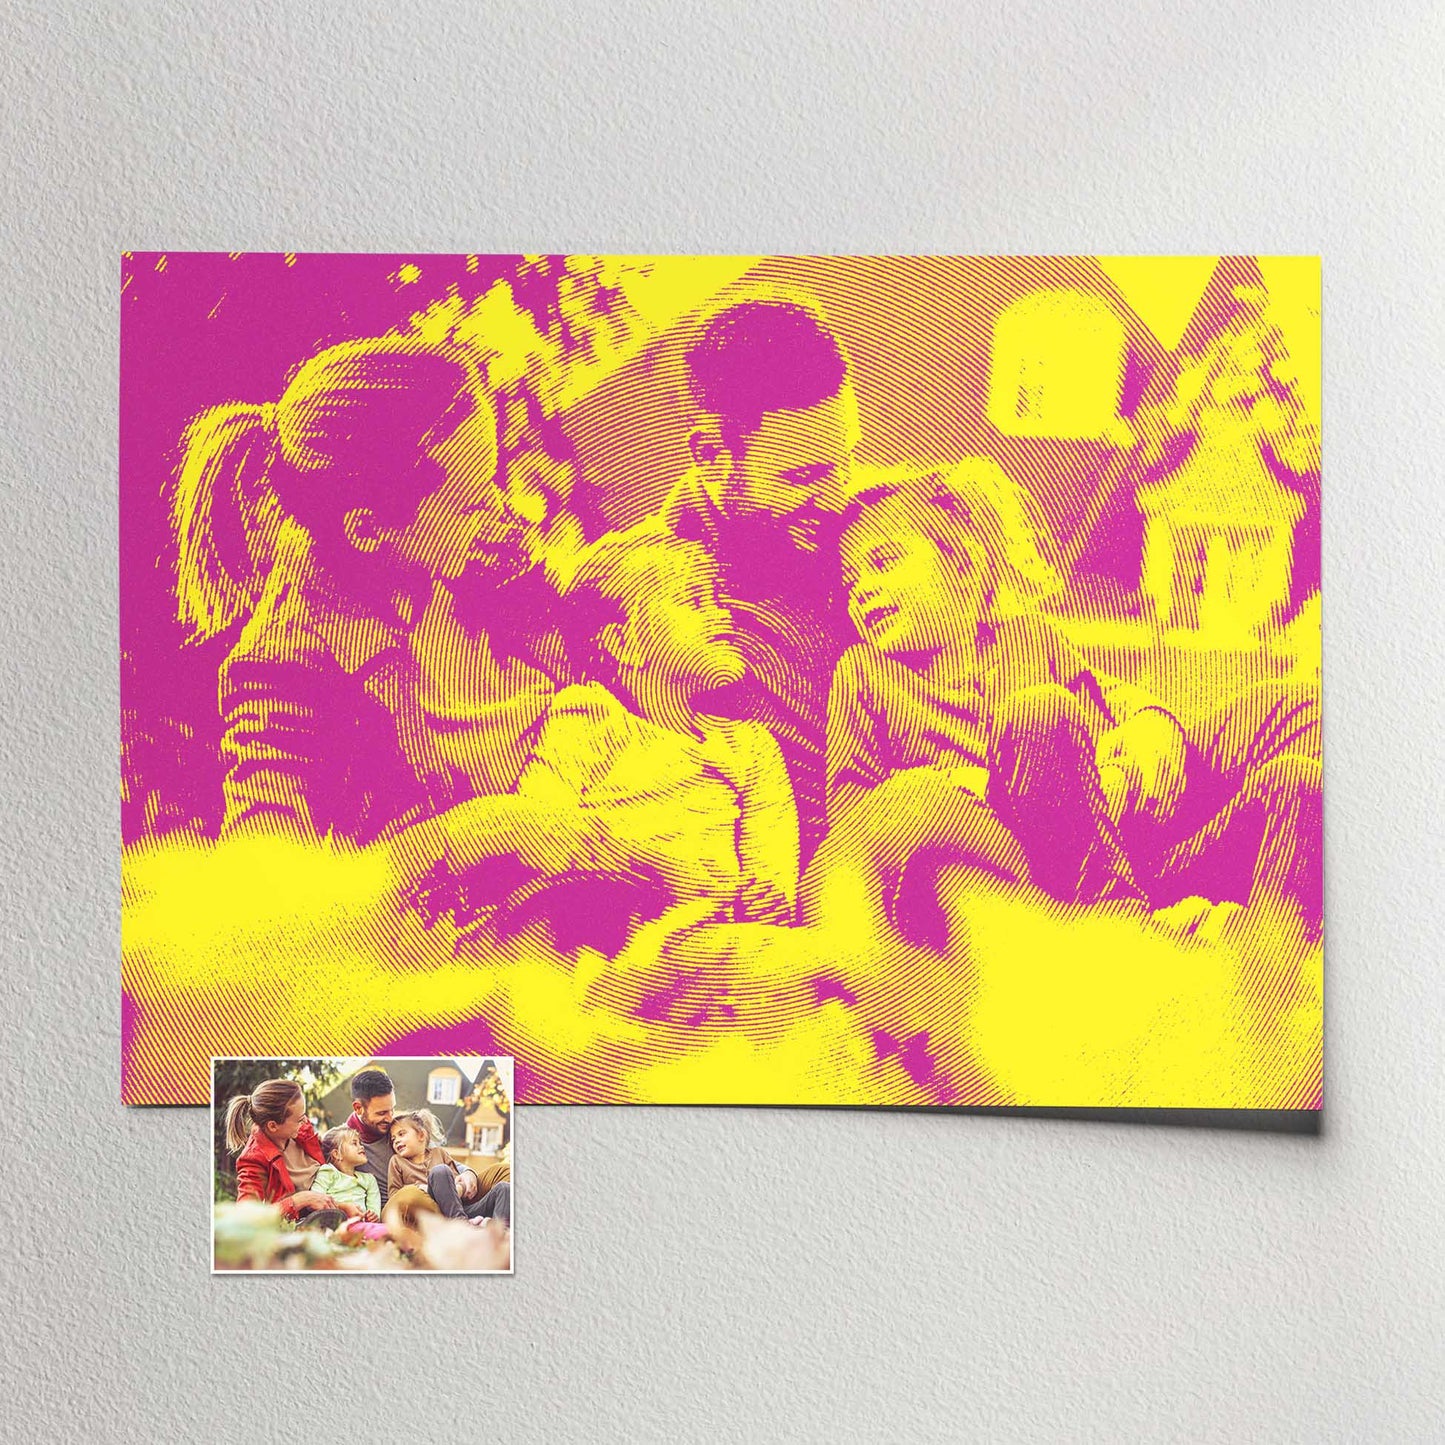 Celebrate life's vibrant moments with this Personalised Yellow & Pink Texture Print. The painting, inspired by your cherished photo, captures the essence of joy and happiness. Its modern texture effect showcases a bold and creative blend 